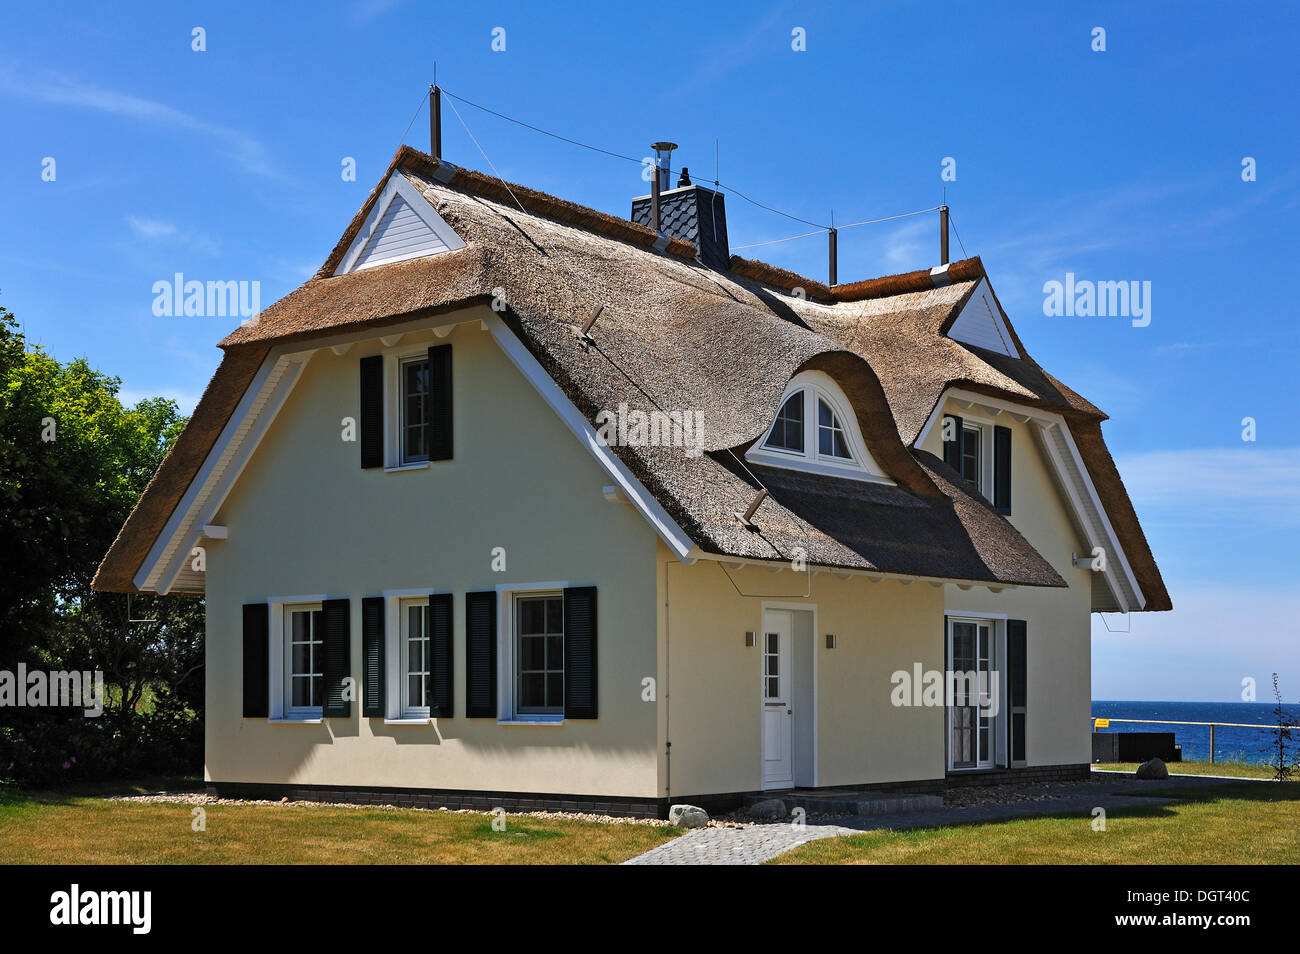 Newly finished detached house with thatched roof, Ahrenshoop, Darss, Mecklenburg-Western Pomerania Stock Photo